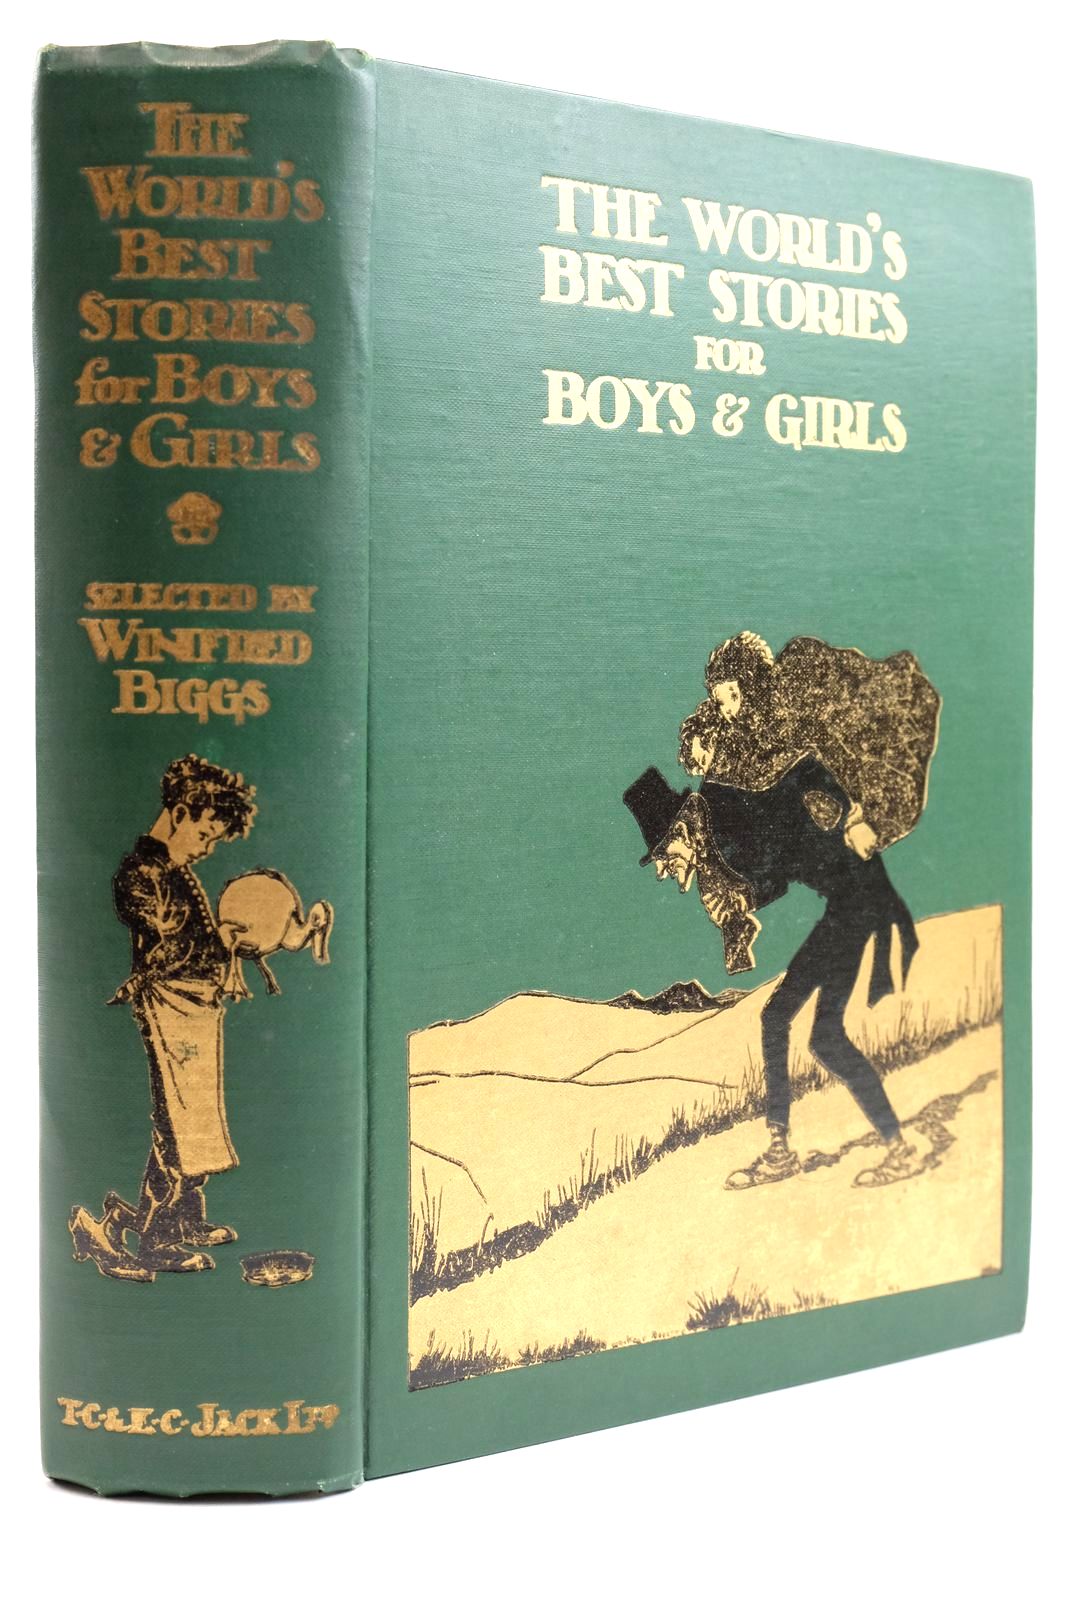 Photo of THE WORLD'S BEST STORIES FOR BOYS &amp; GIRLS written by Biggs, Winifred illustrated by Appleton, Honor C. published by T.C. &amp; E.C. Jack Ltd., T. Nelson &amp; Sons (STOCK CODE: 2133906)  for sale by Stella & Rose's Books